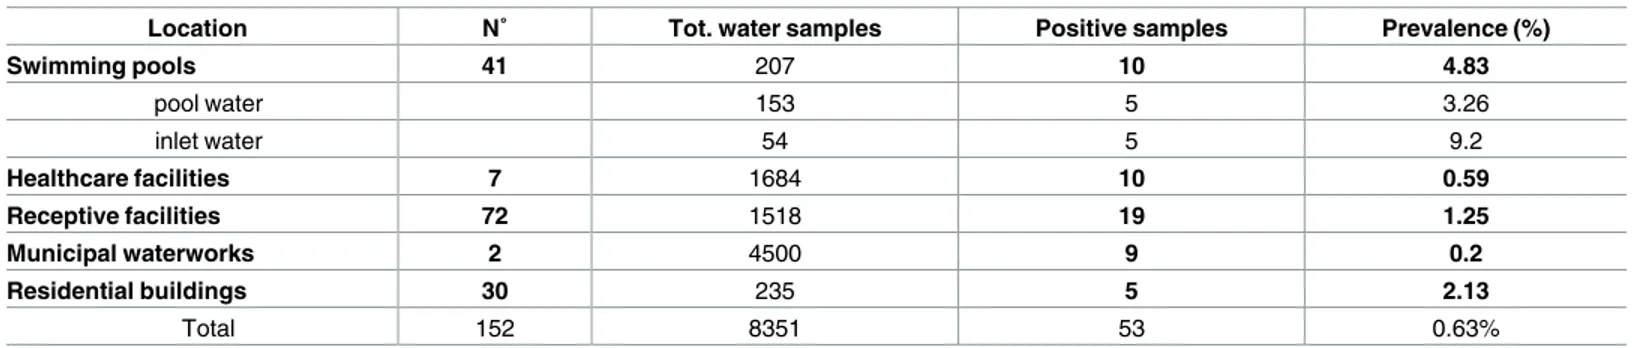 Table 2. Prevalence of Pseudomonas aeruginosa in water samples from different locations.